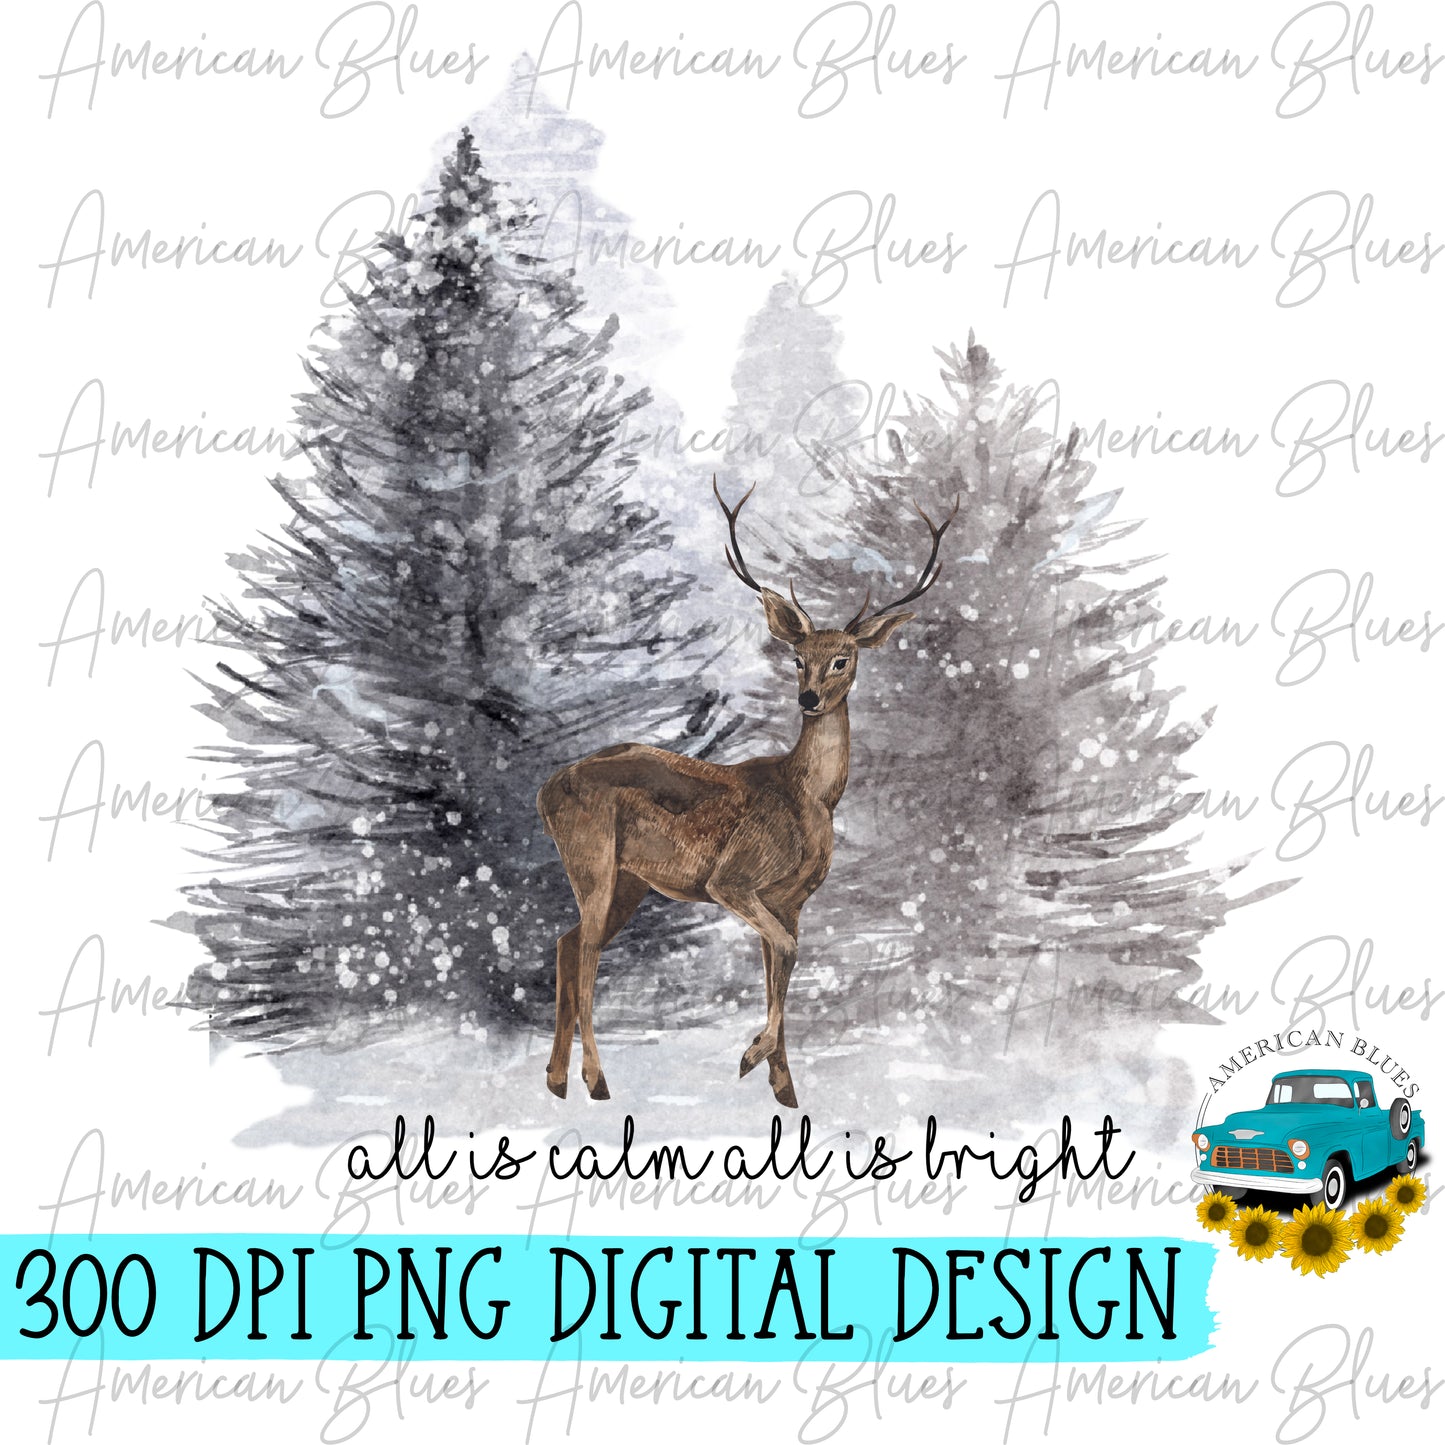 All is calm all is bright- snowy forest deer